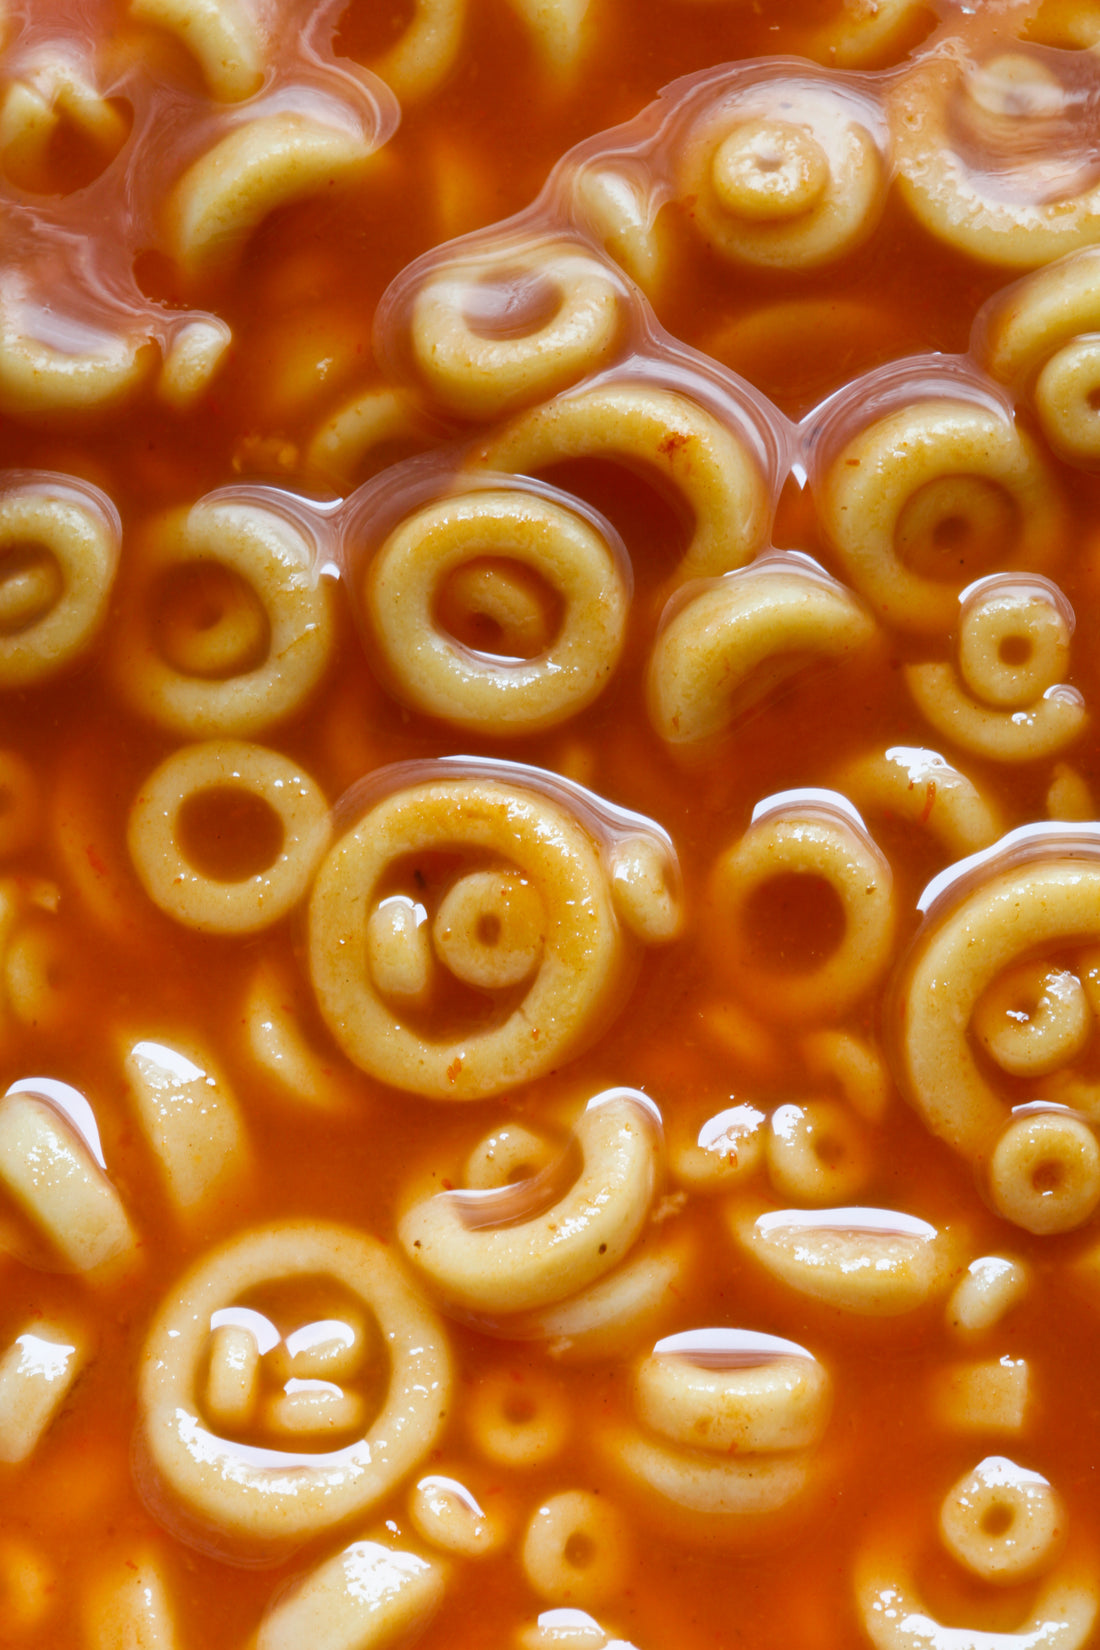 Spaghetti O's my childhood friend, we celebrate you on National Noodle Ring Day - December 11